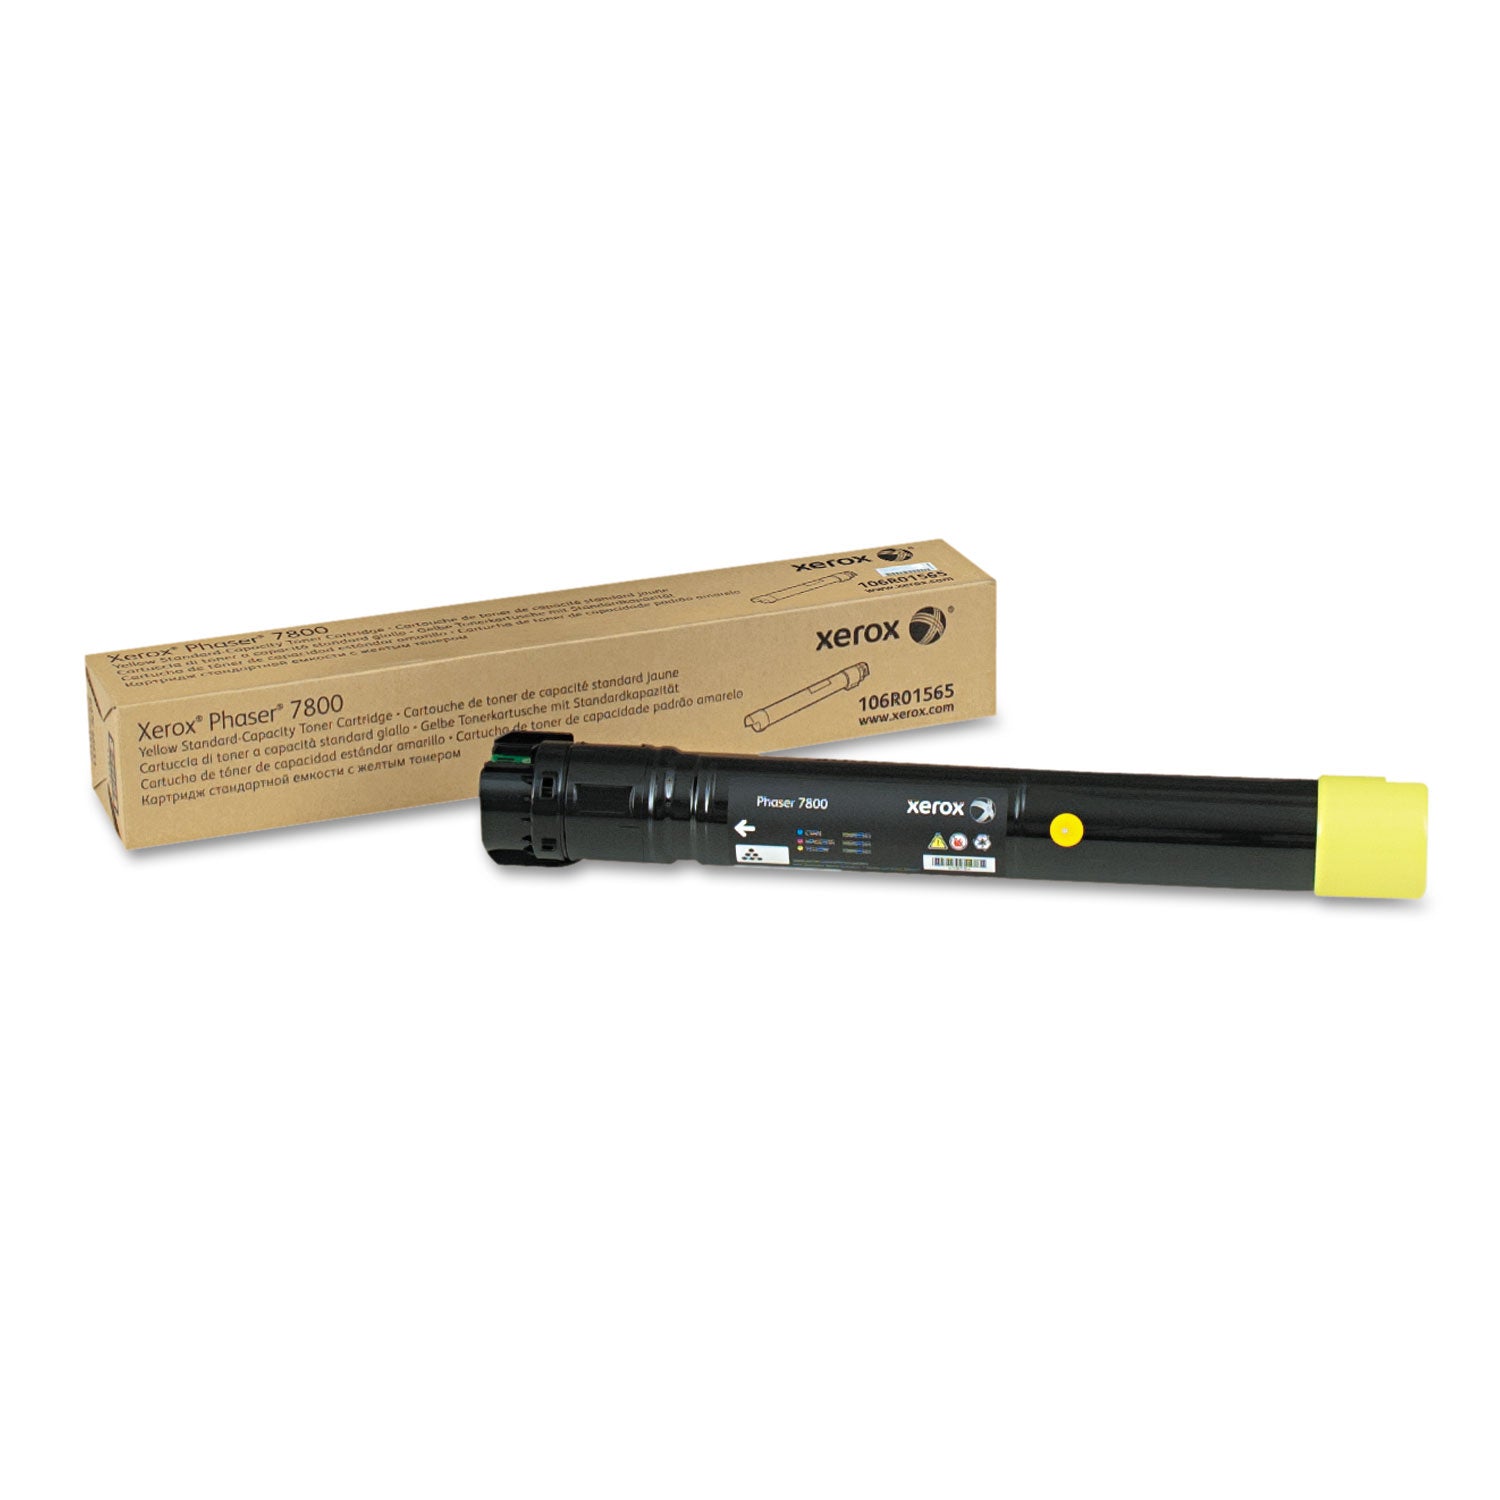 106R01565 Toner, 6,000 Page-Yield, Yellow - 